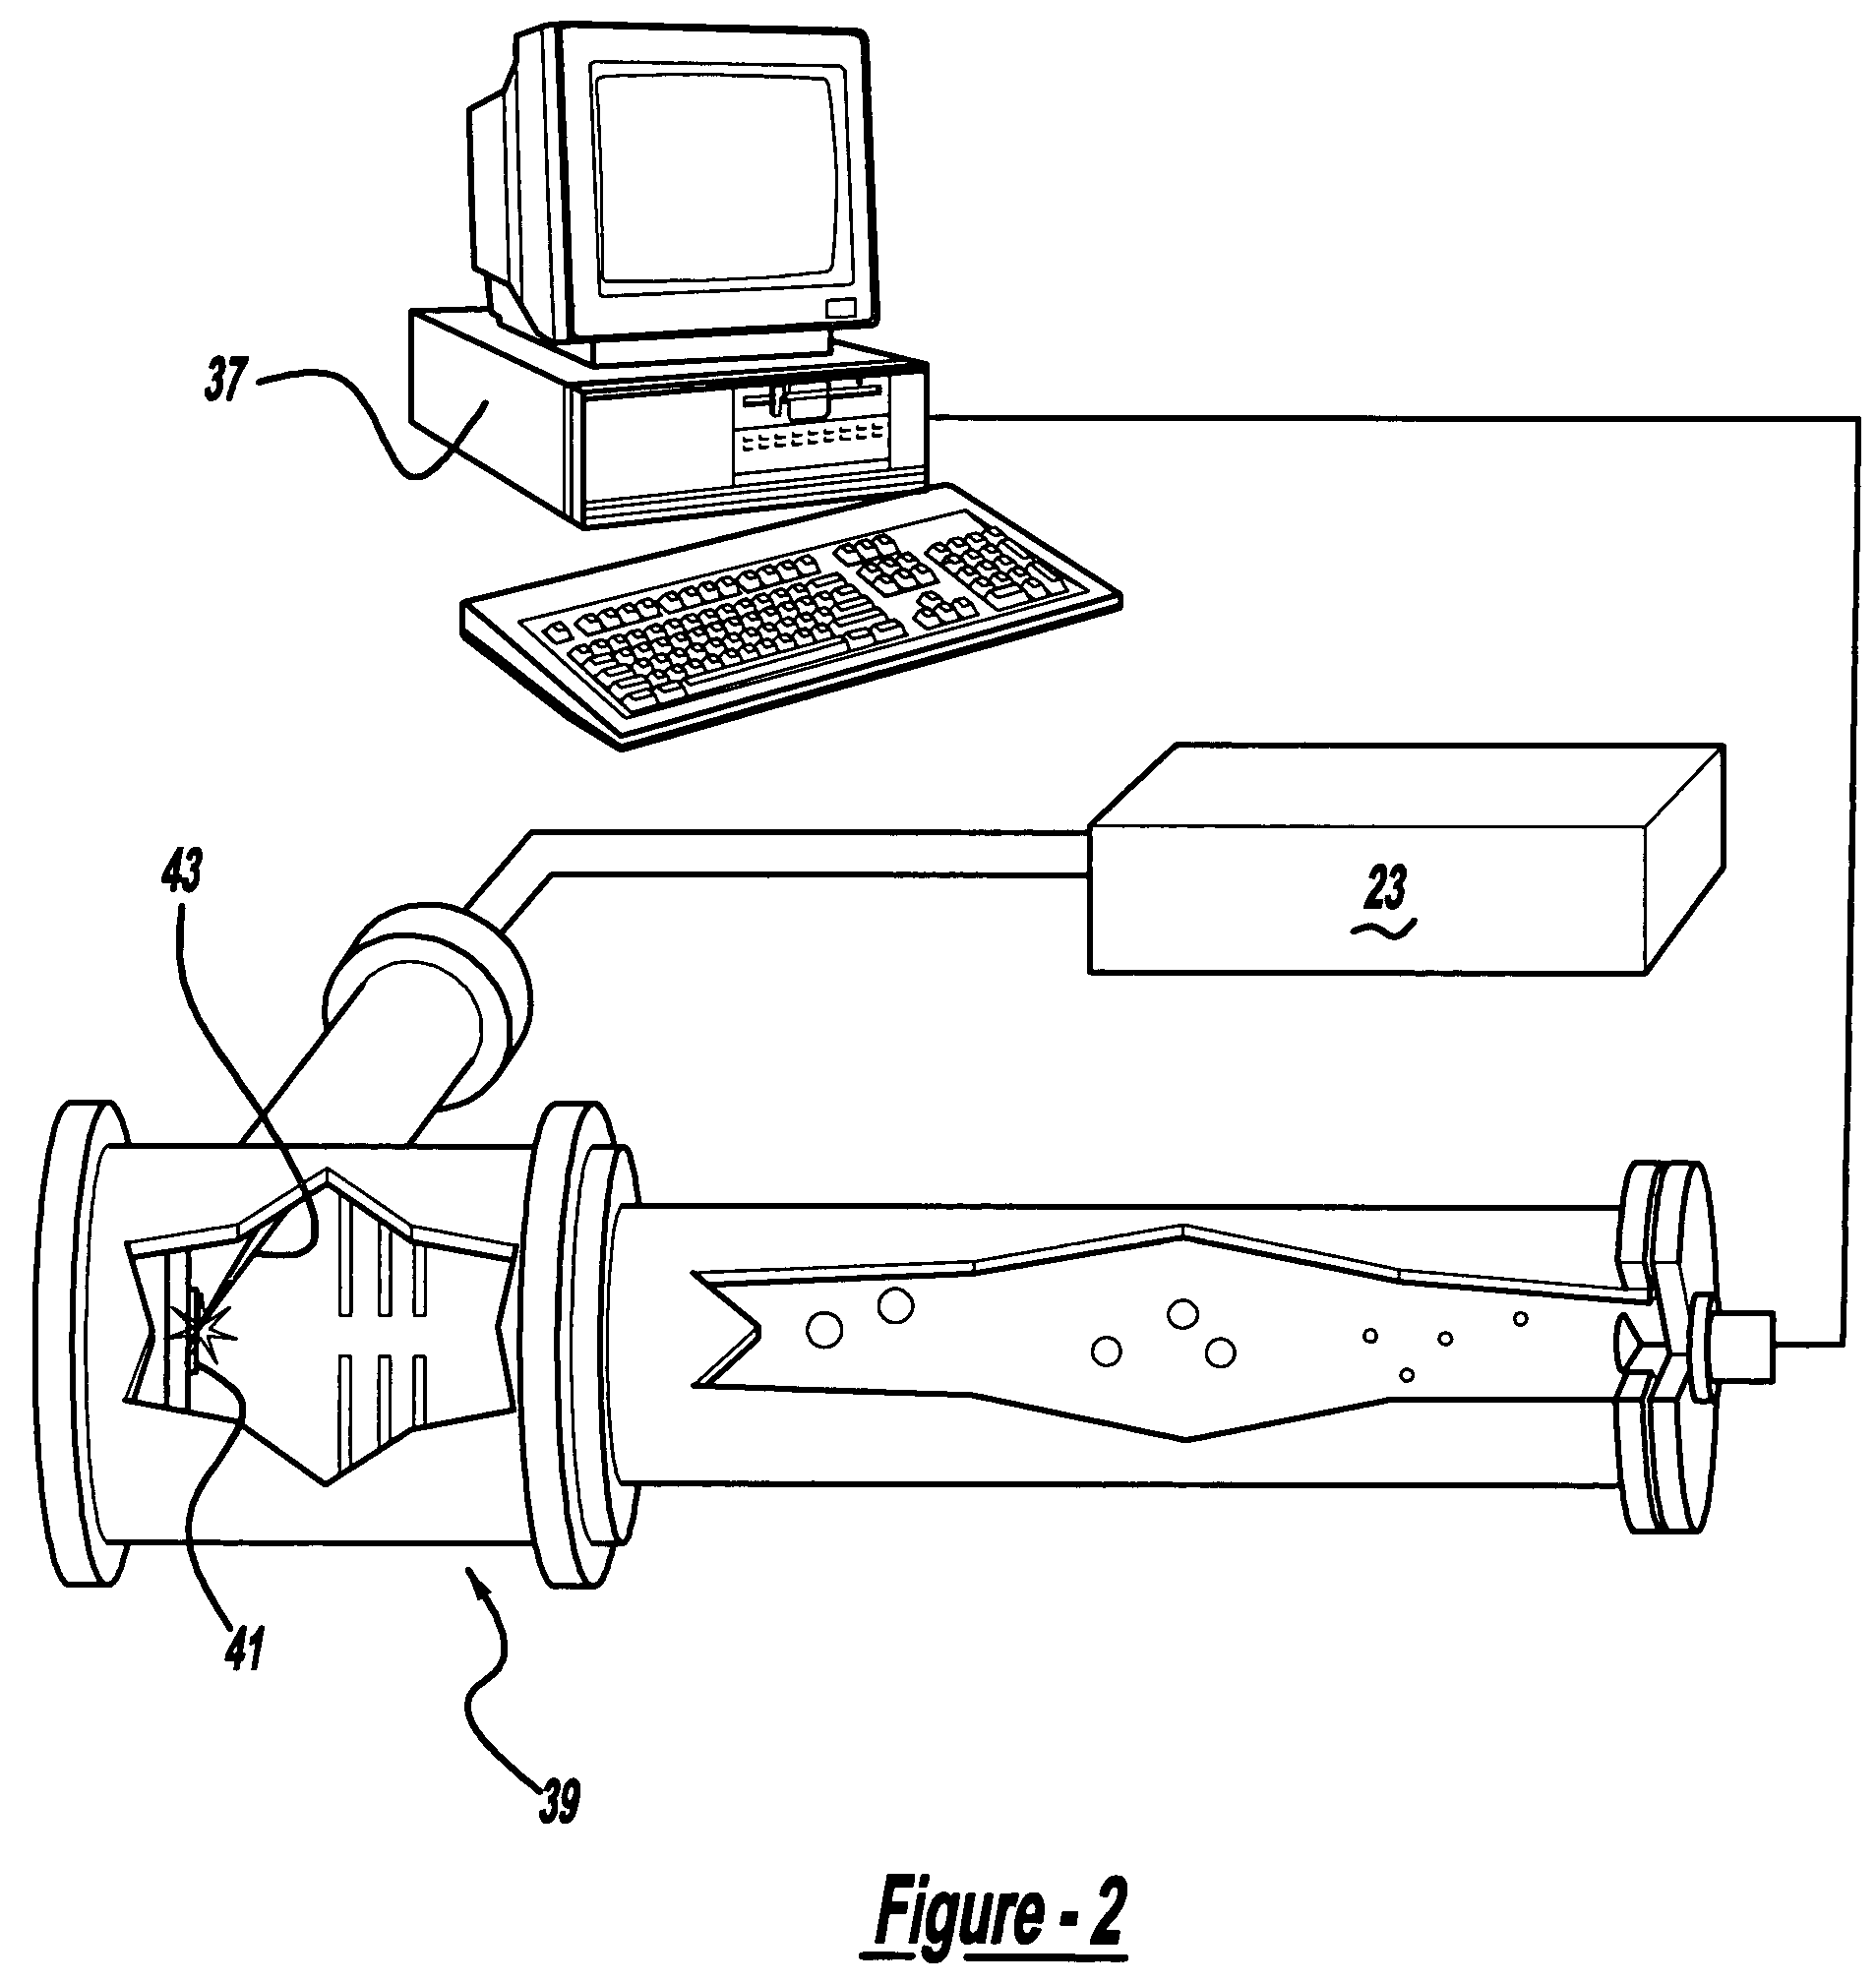 Control system and apparatus for use with ultra-fast laser